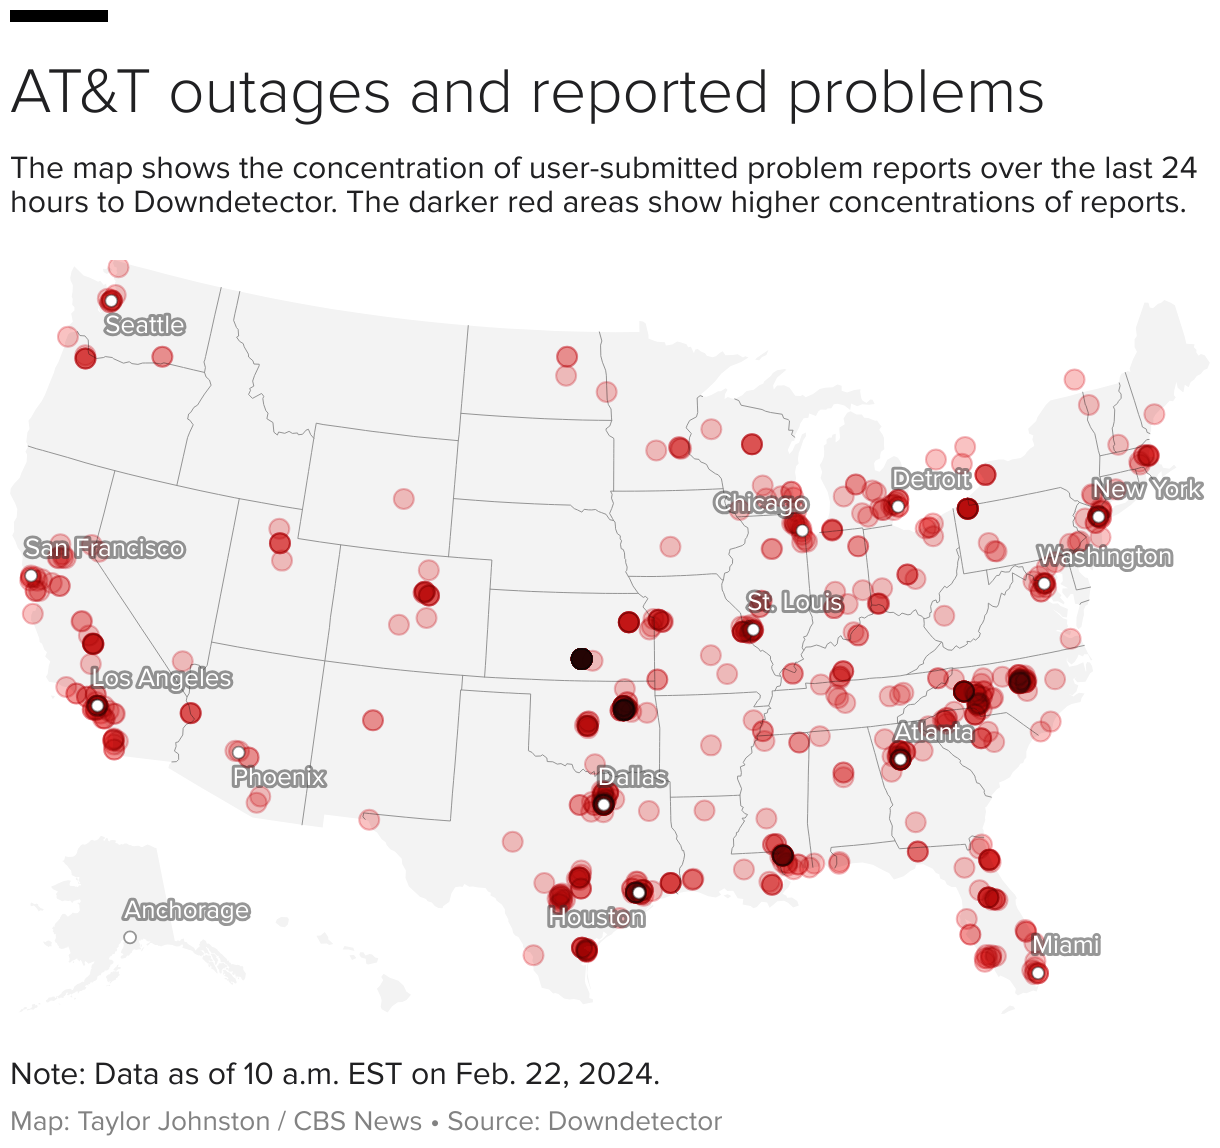 The outage map displays the areas where AT&T cellular service experienced disruptions for users throughout the United States.